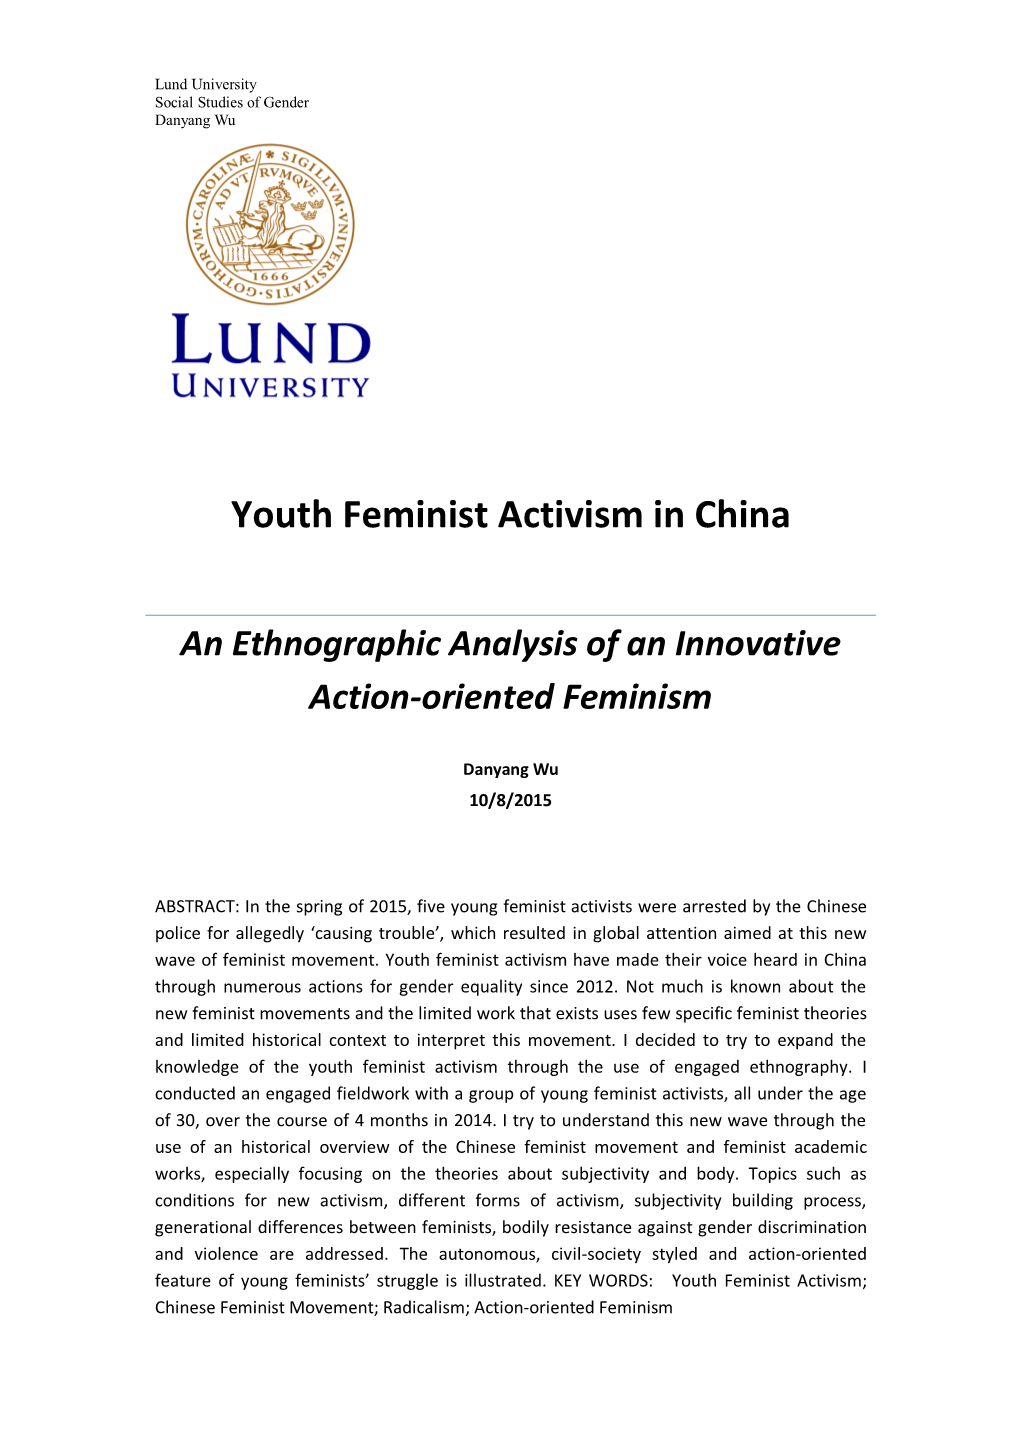 Youth Feminist Activism in China